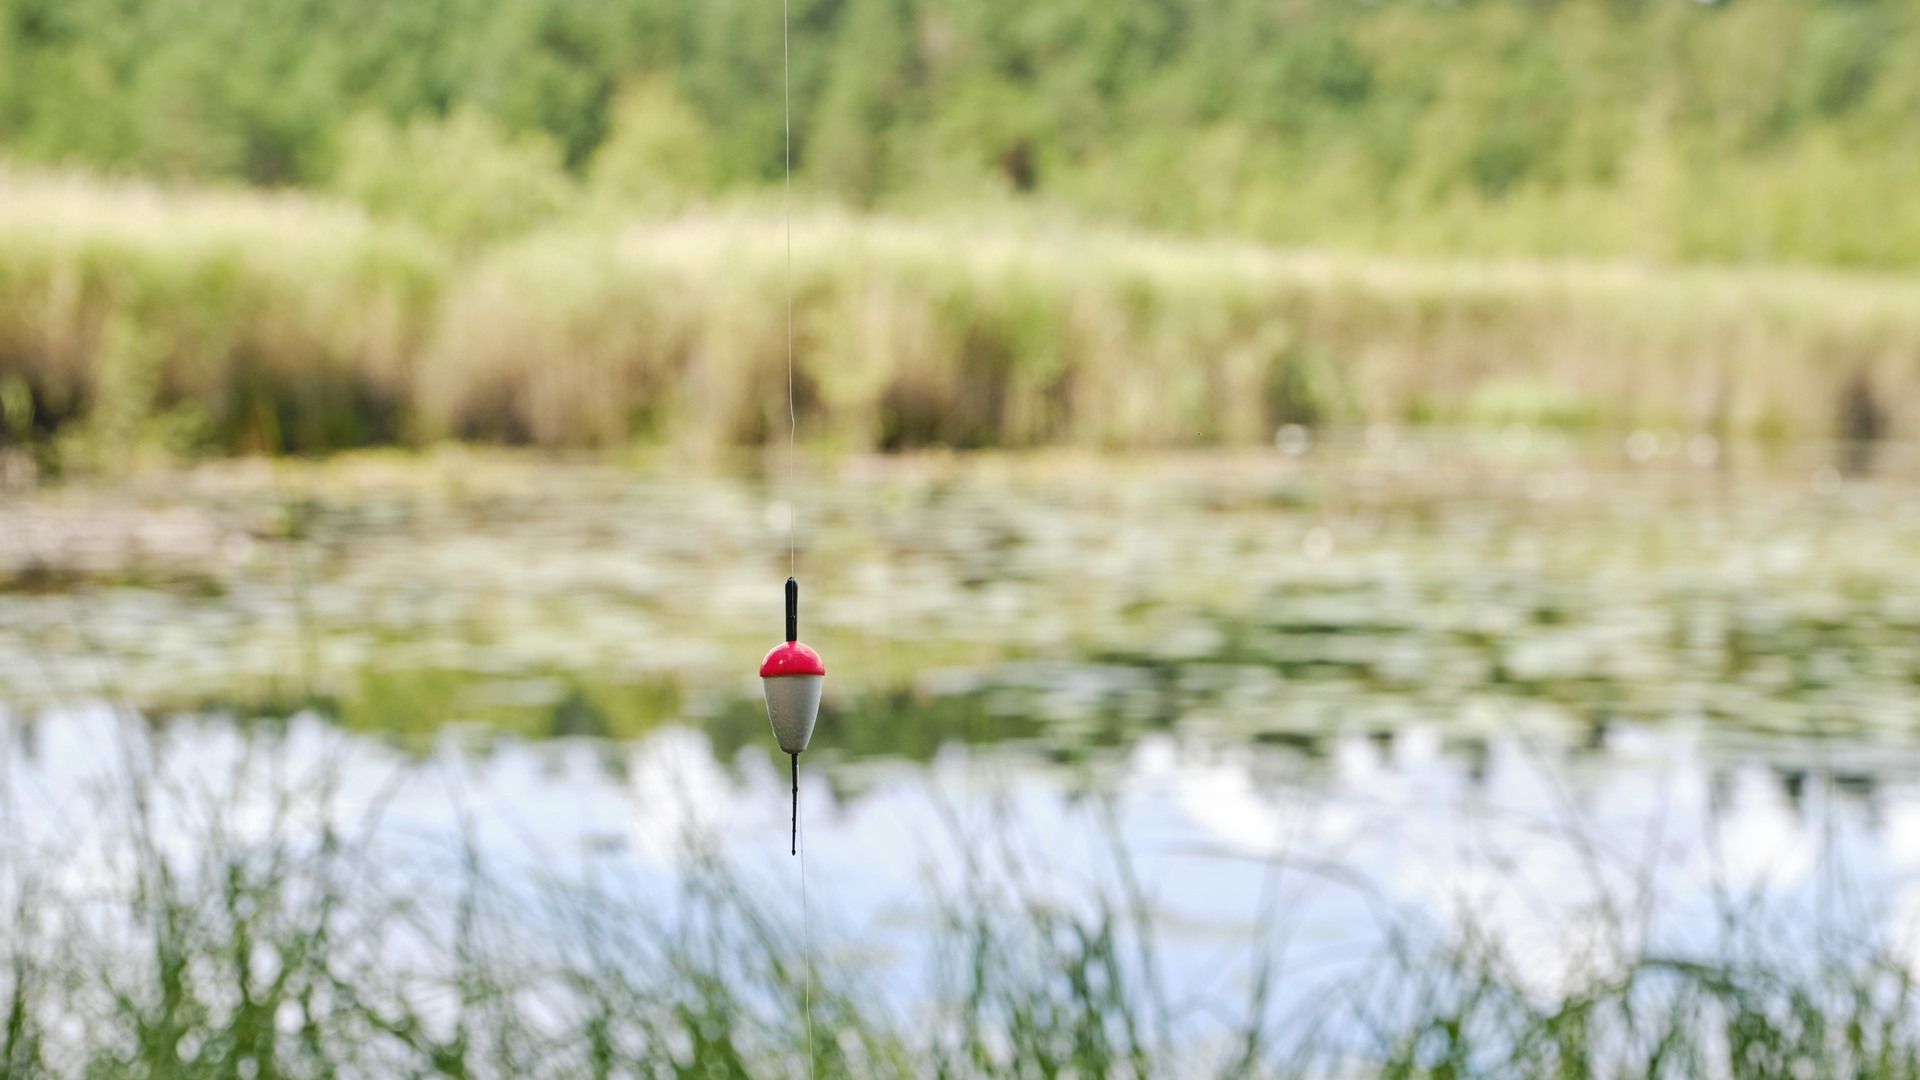 A bobber on a fishing rod.